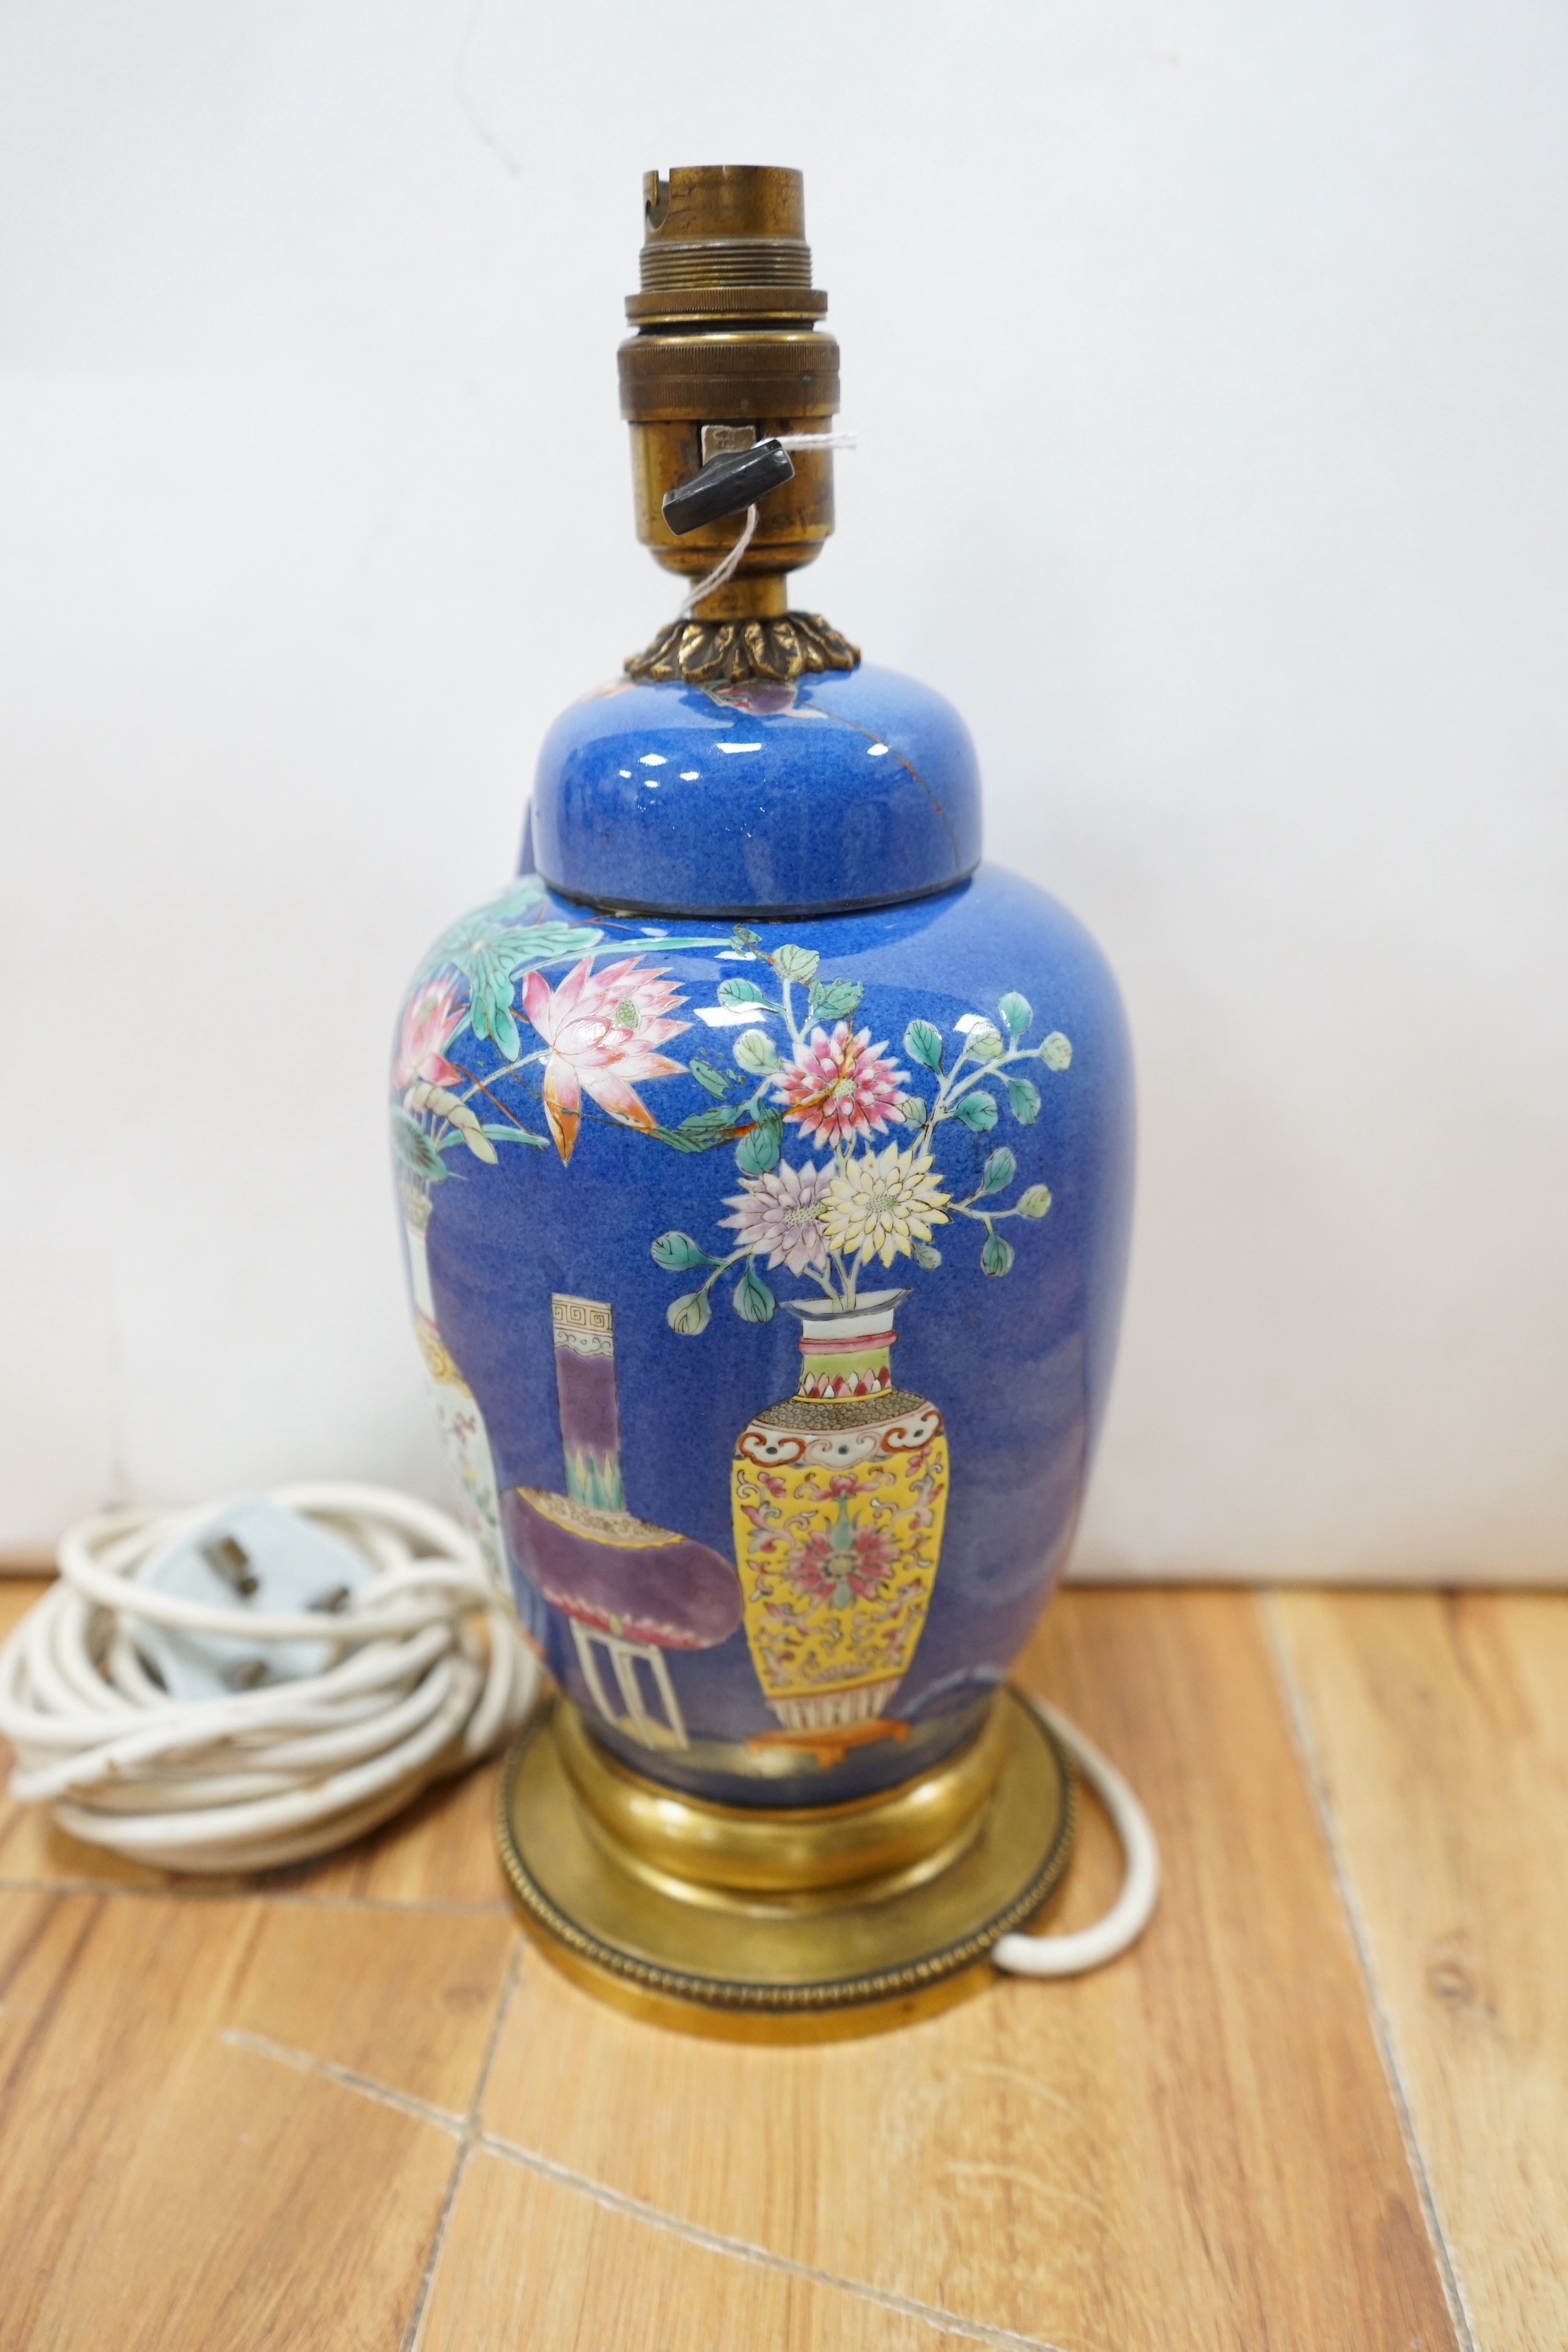 A late 19th century Chinese jar and cover with blue background and fine enamelled vases, jars, etc., later converted into a table lamp (cover broken in half and late glued to jar)